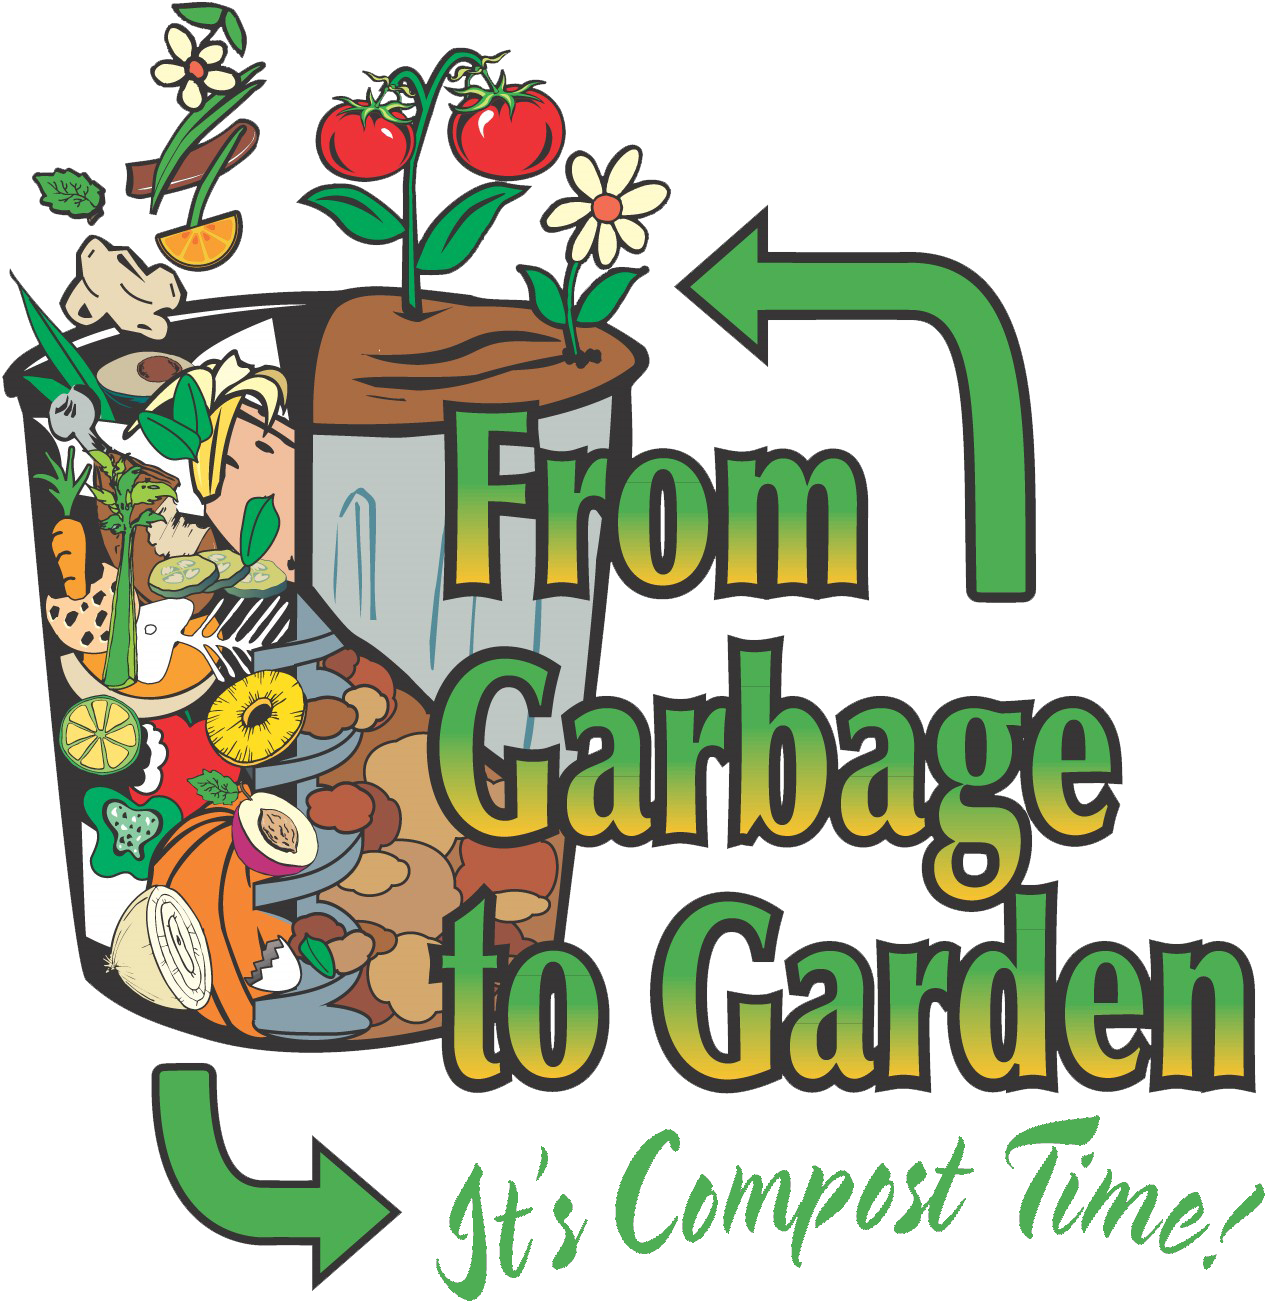 A Compost Primer - Composting From Garbage To Garden (1267x1304)